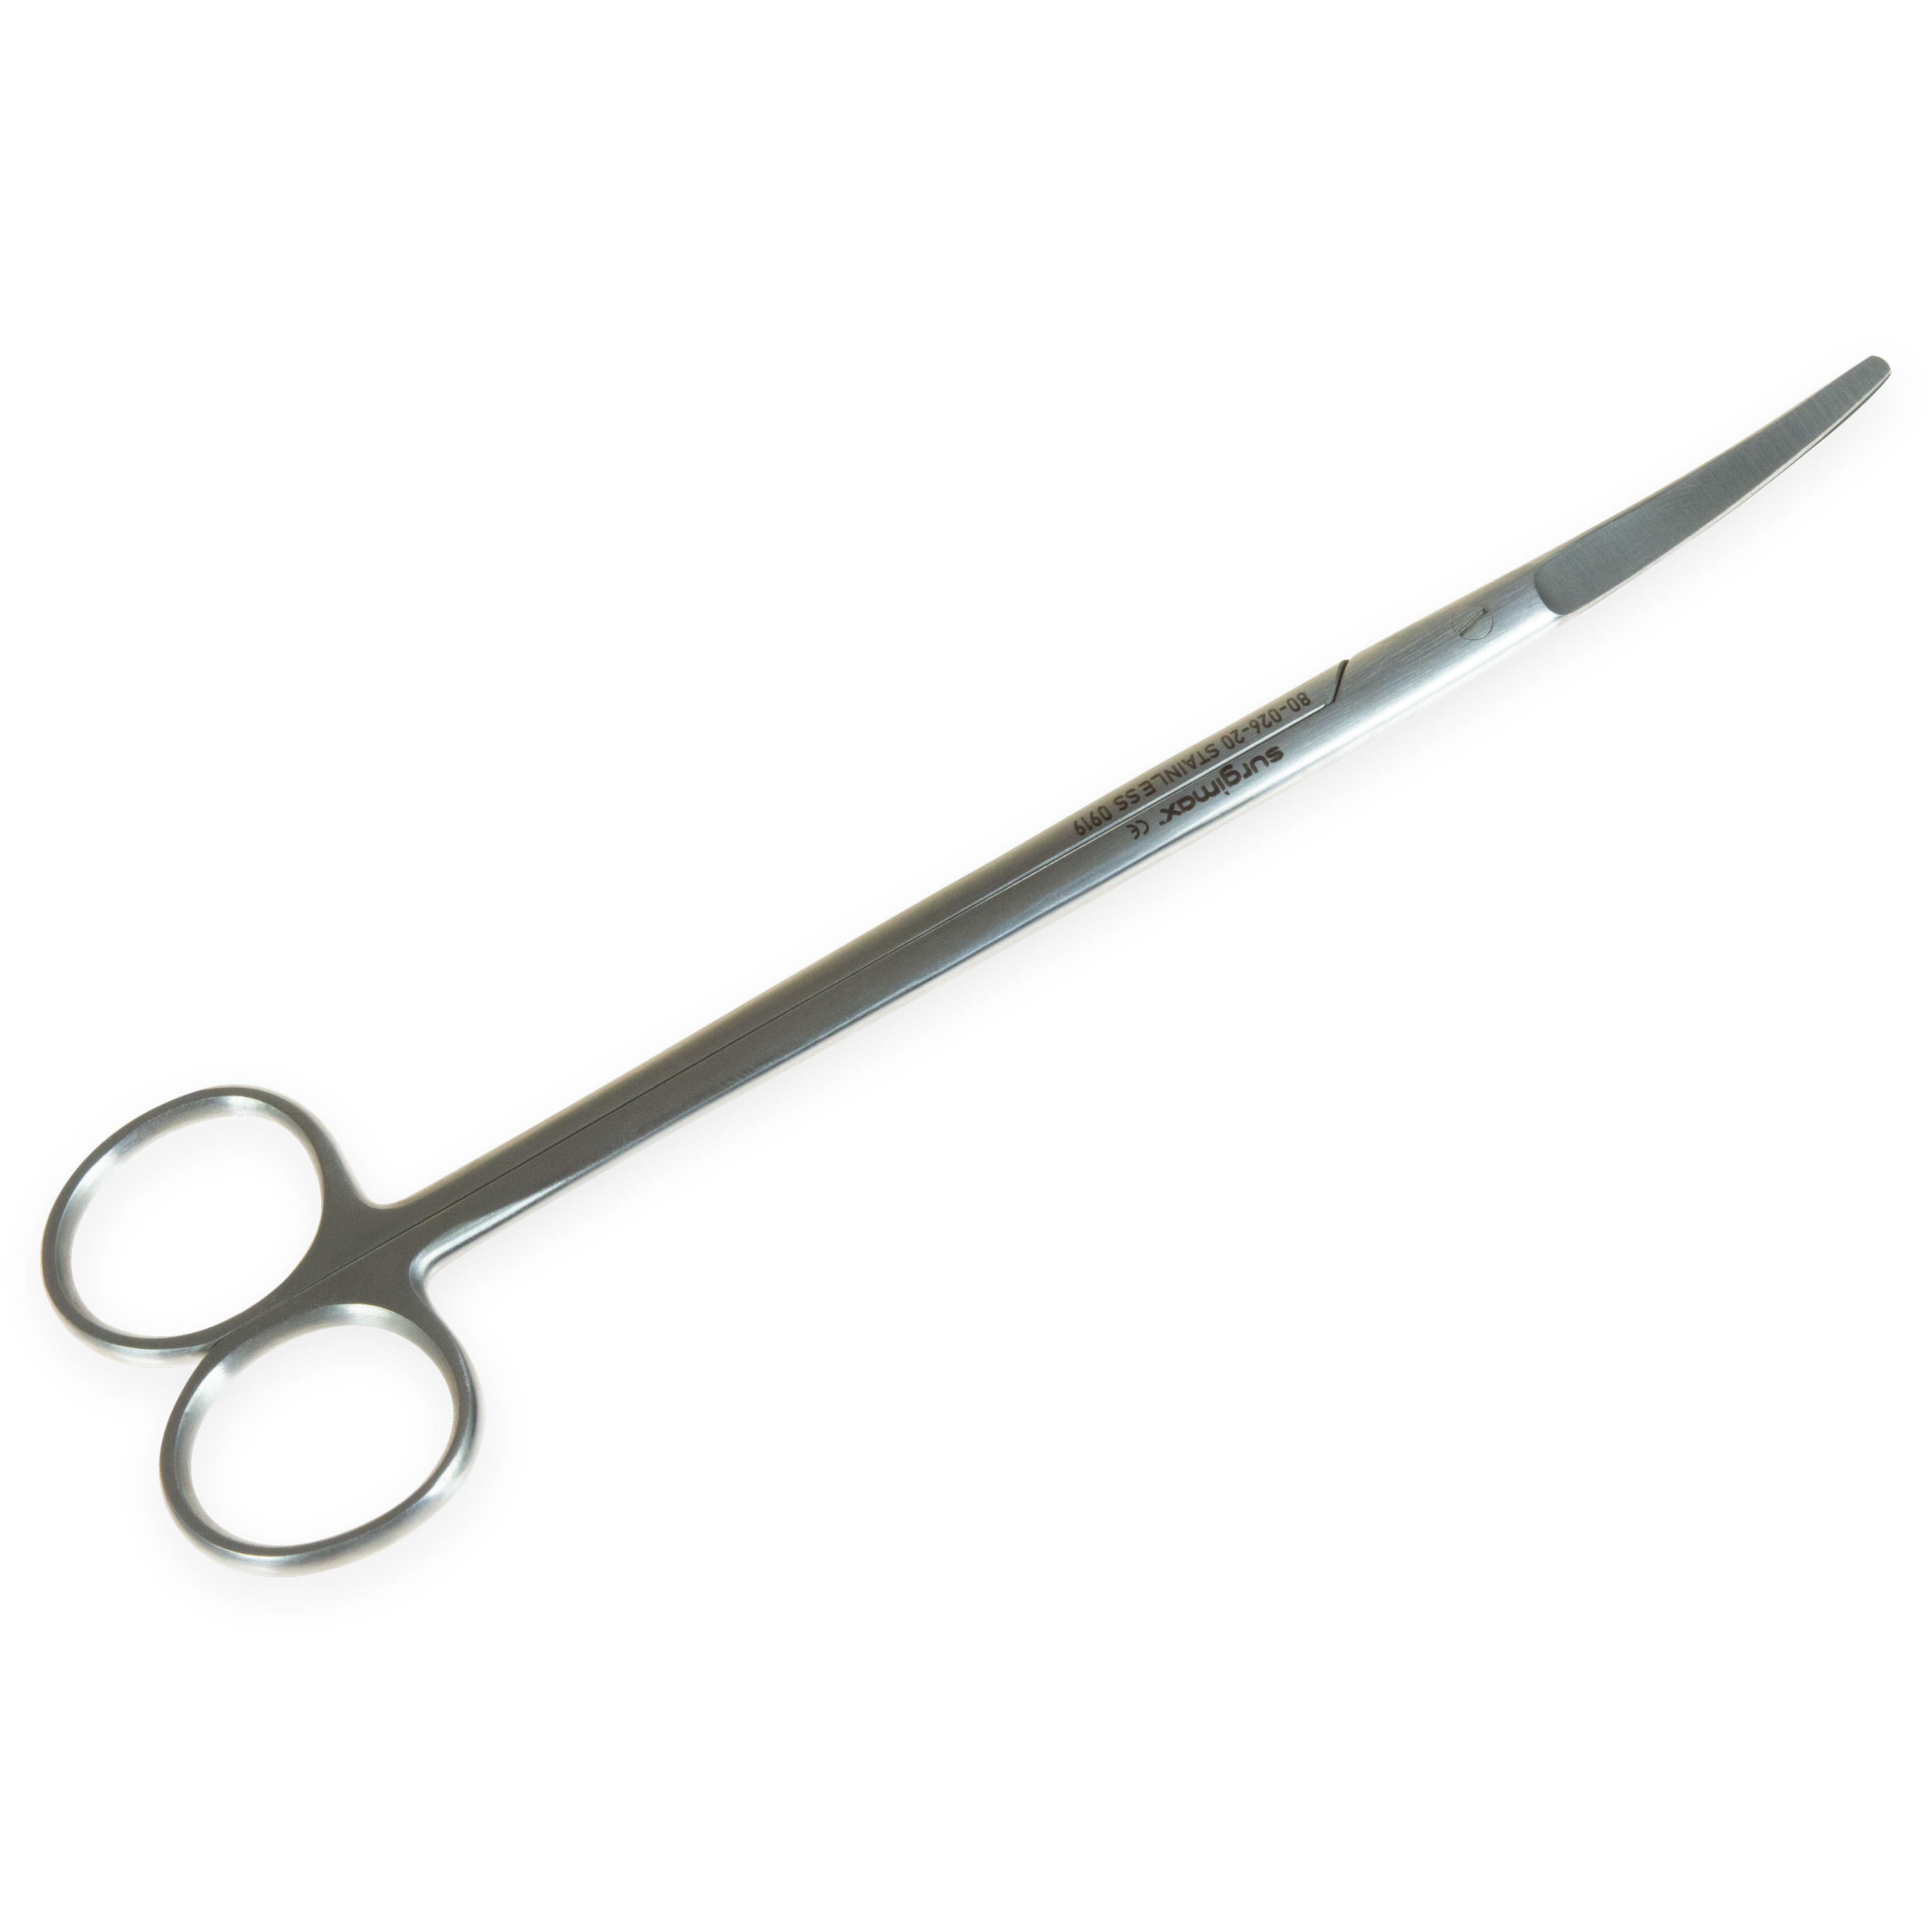 Mayo Scissors short curved blades no tips 20 cm